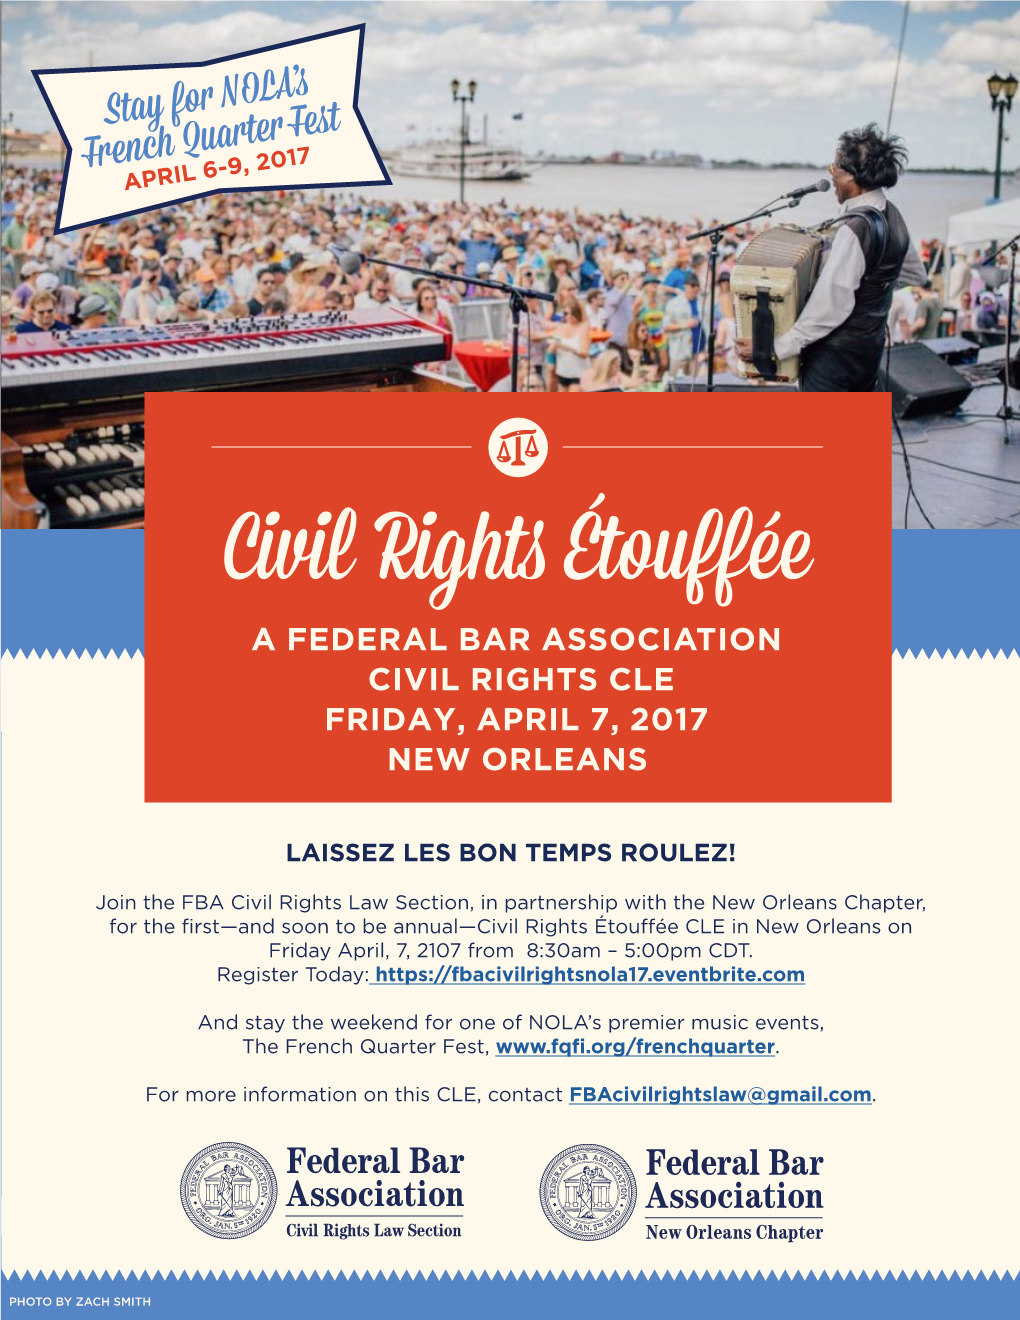 Civil Rights Étouffée a FEDERAL BAR ASSOCIATION CIVIL RIGHTS CLE FRIDAY, APRIL 7, 2017 NEW ORLEANS